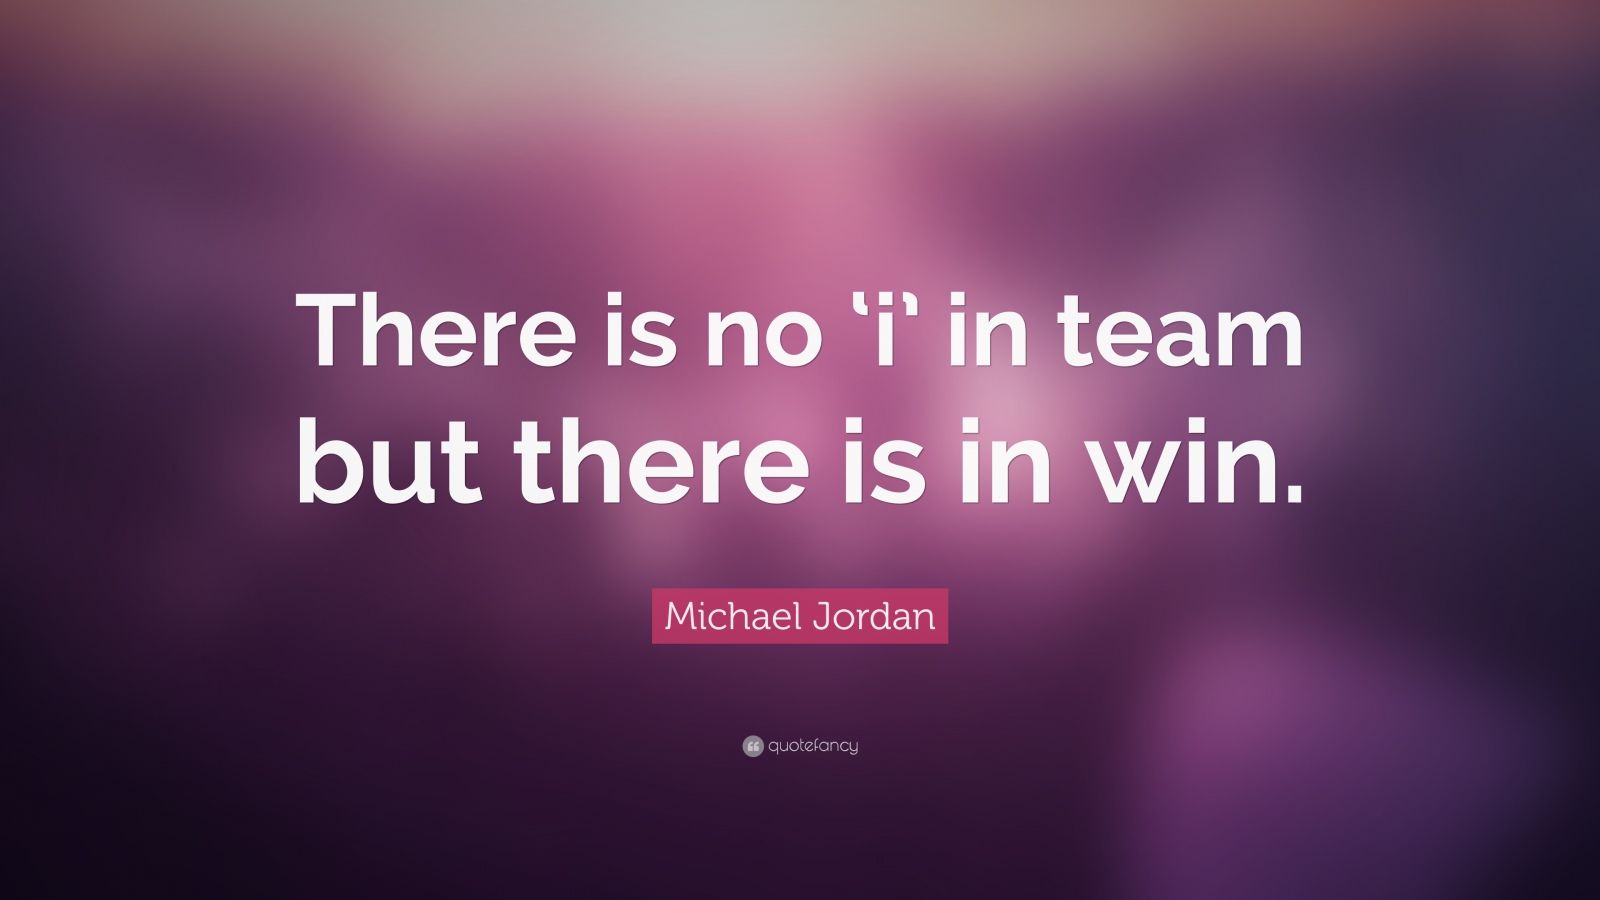 Michael Jordan Quote: “There is no ‘i’ in team but there is in win ...